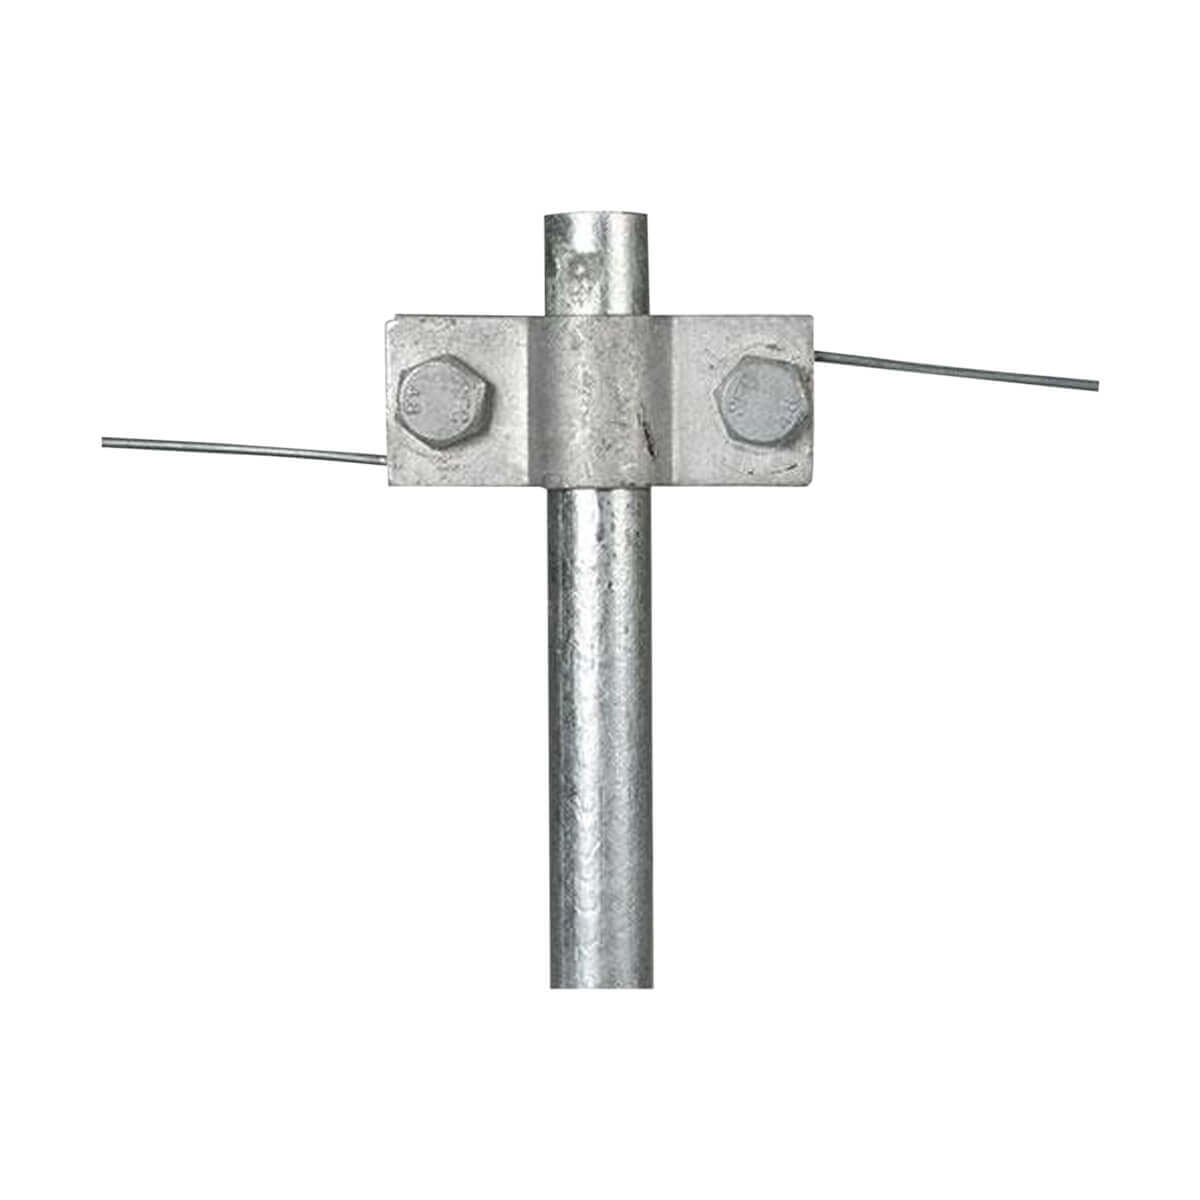 Gallagher Ground Clamp - 1 pack